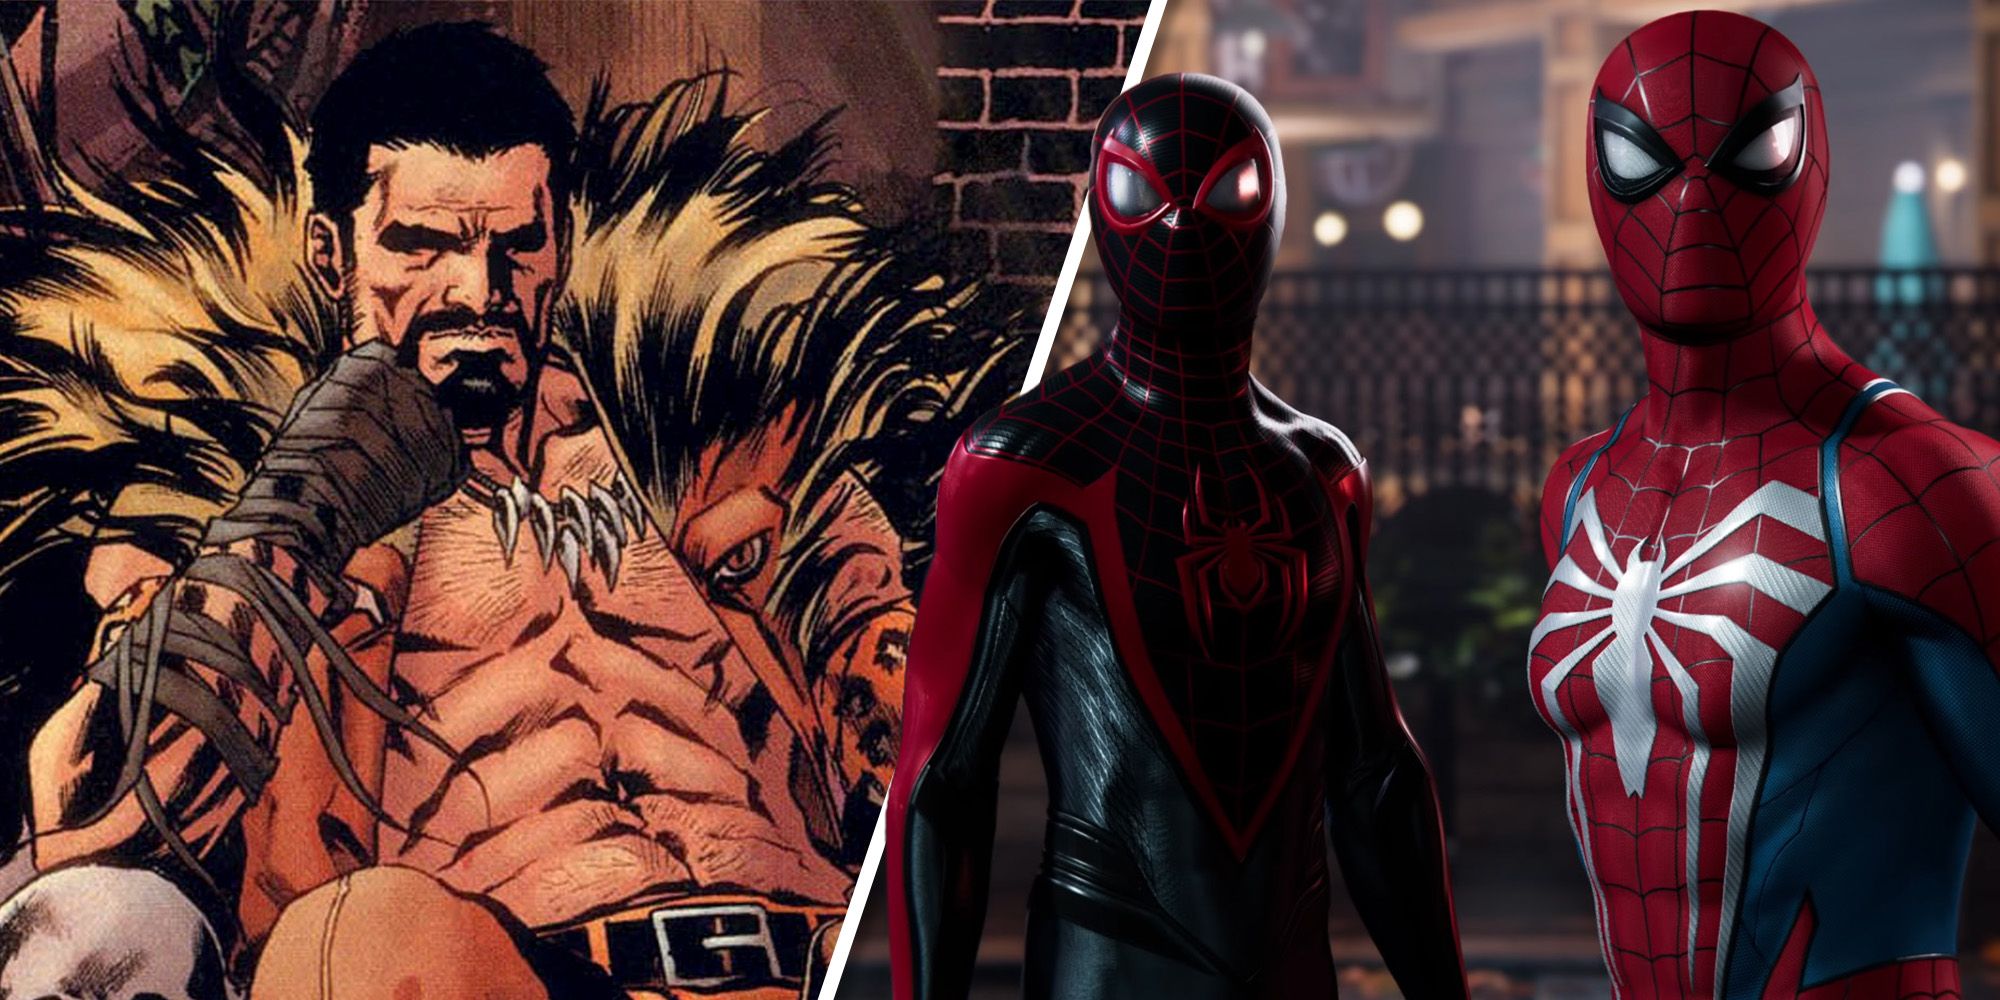 Split image: Kraven the Hunter sits on throne on the left. Miles Morales and Peter Parker from Spider-Man 2 first trailer on the right. 